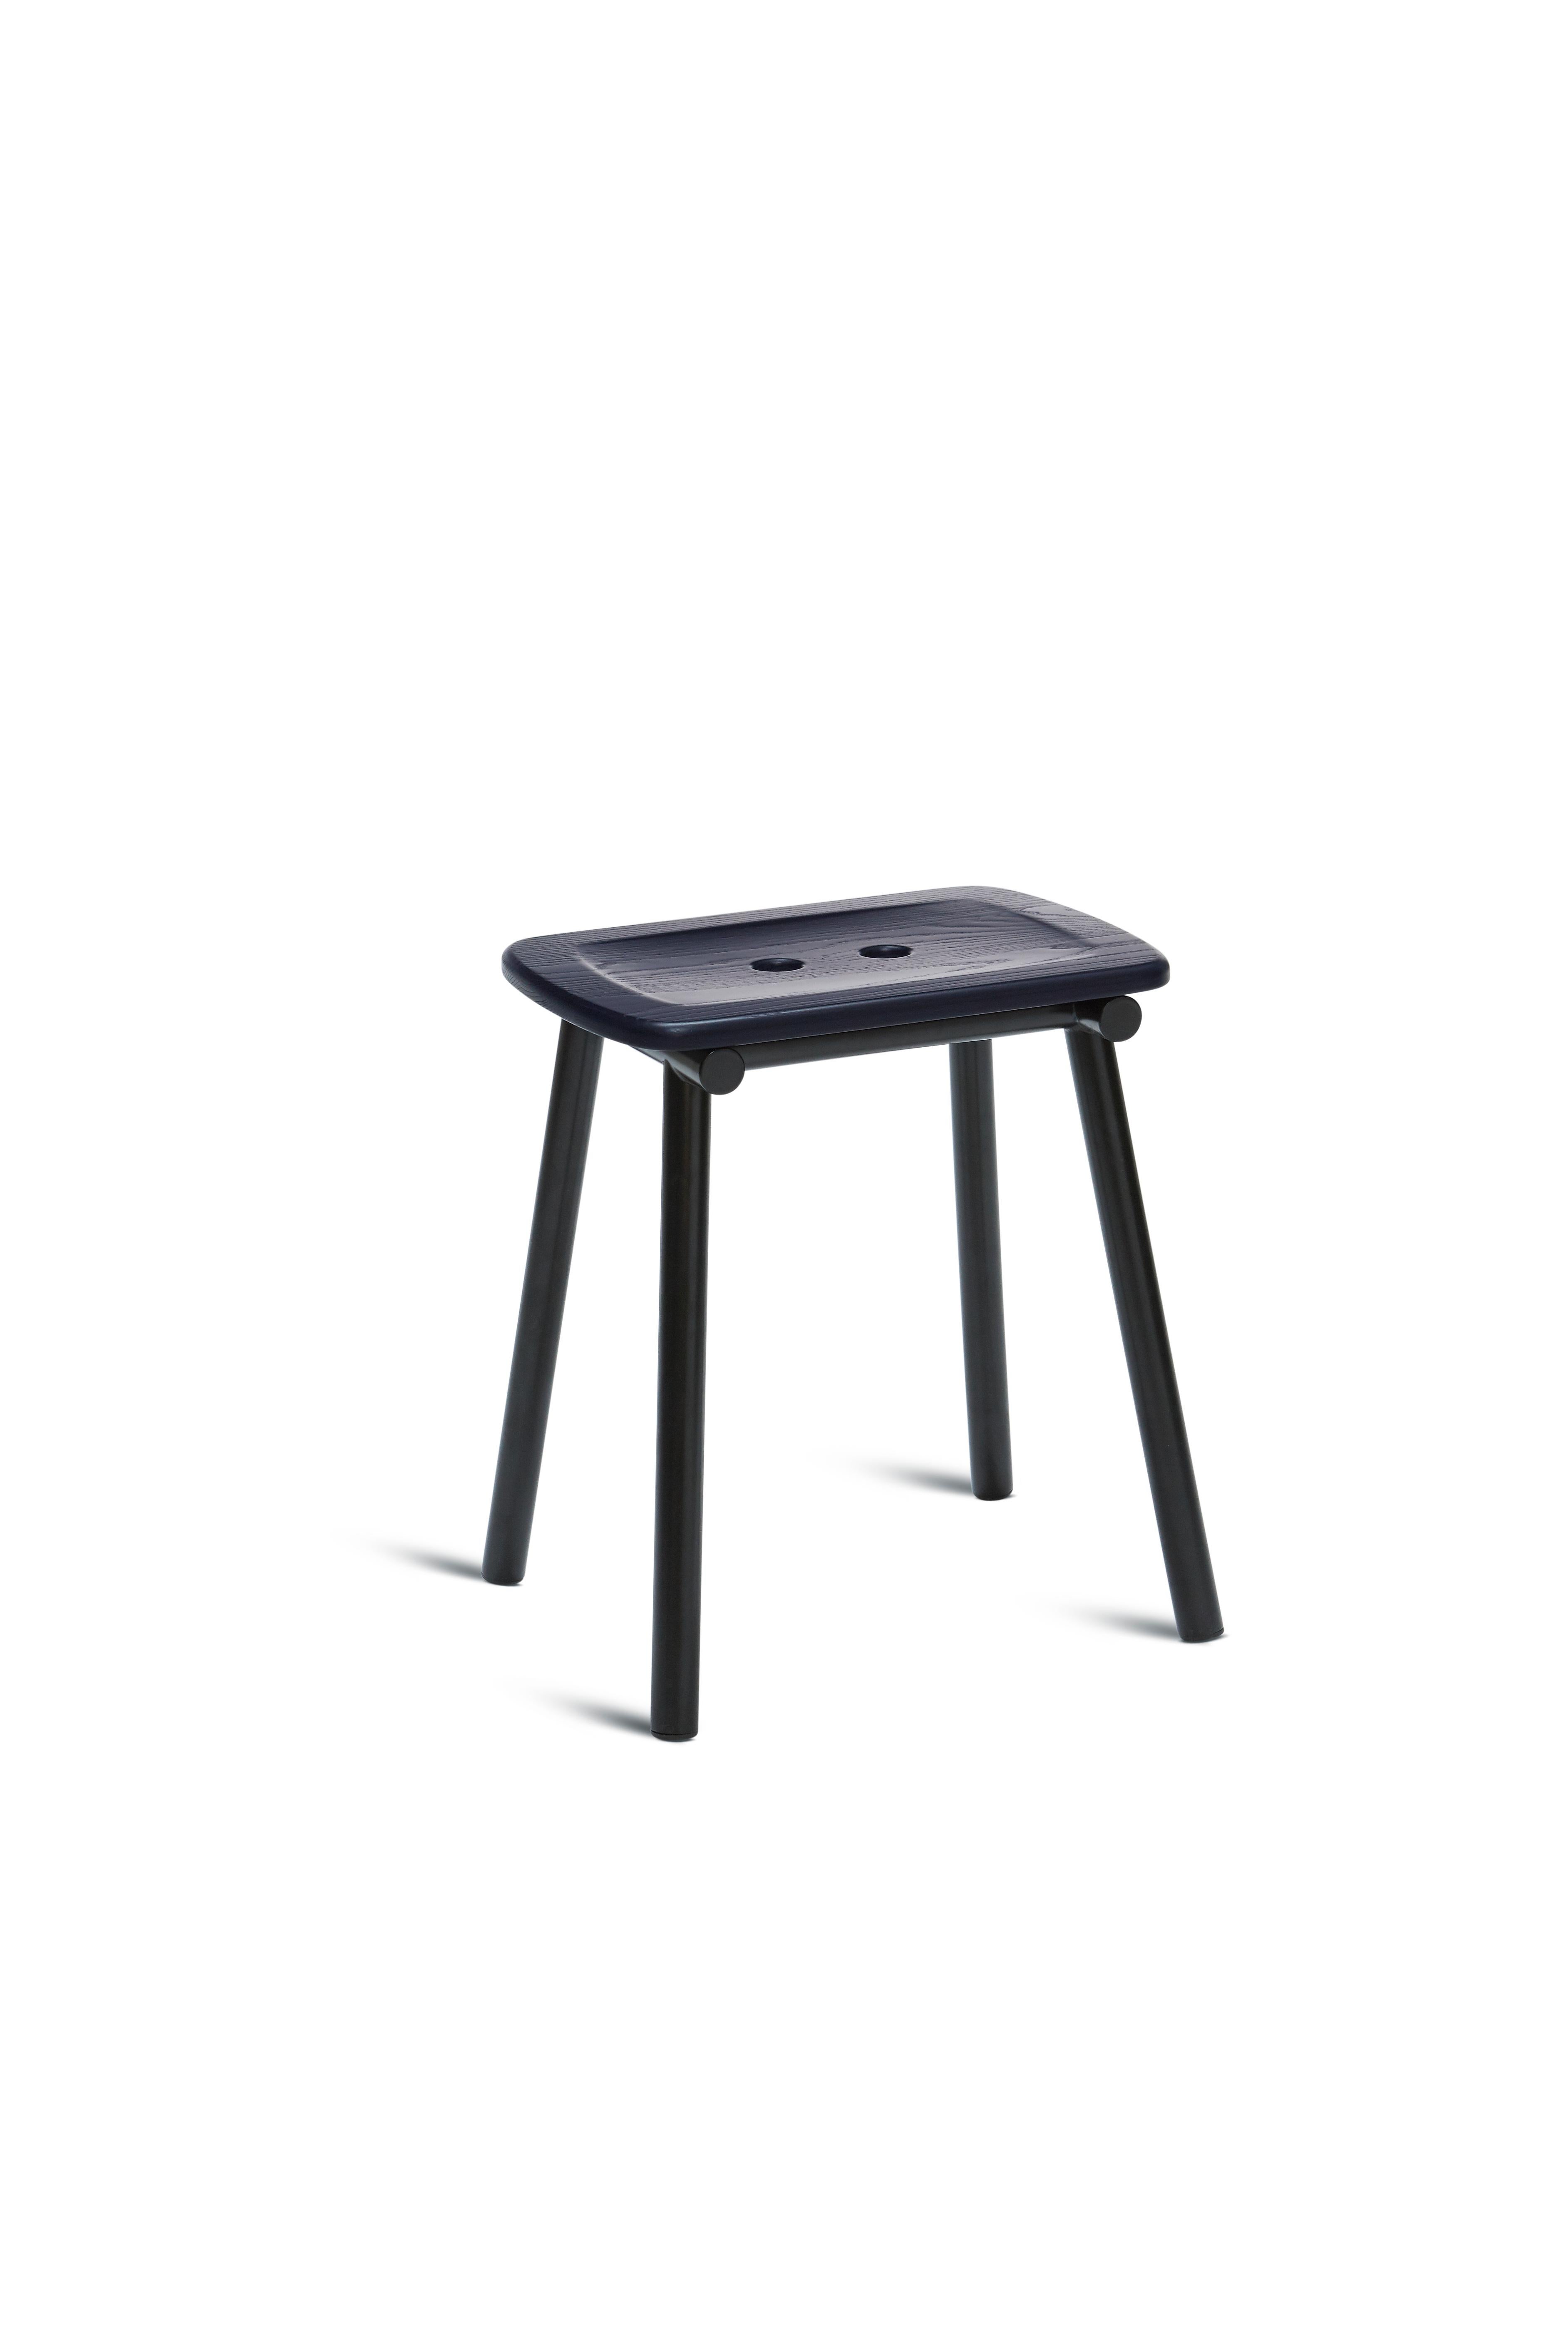 For Sale: Blue (Painted Navy Blue) Tubby Tube Low Stool with Wooden Seat by Faye Toogood